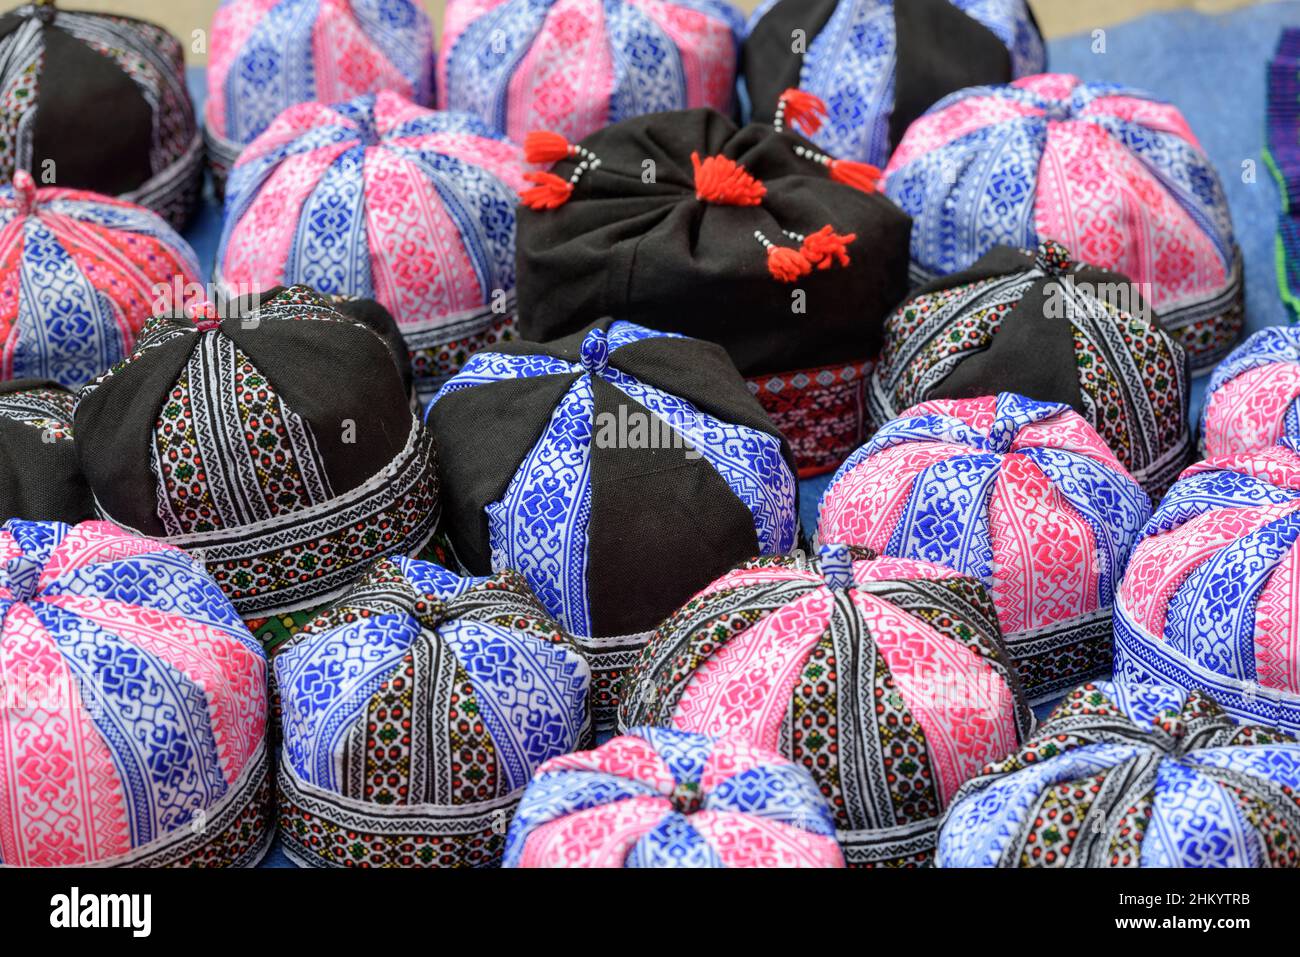 https://c8.alamy.com/comp/2HKYTRB/traditional-hmong-tribe-hats-on-sale-in-a-market-in-sapa-sa-pa-lao-cai-province-vietnam-southeast-asia-2HKYTRB.jpg